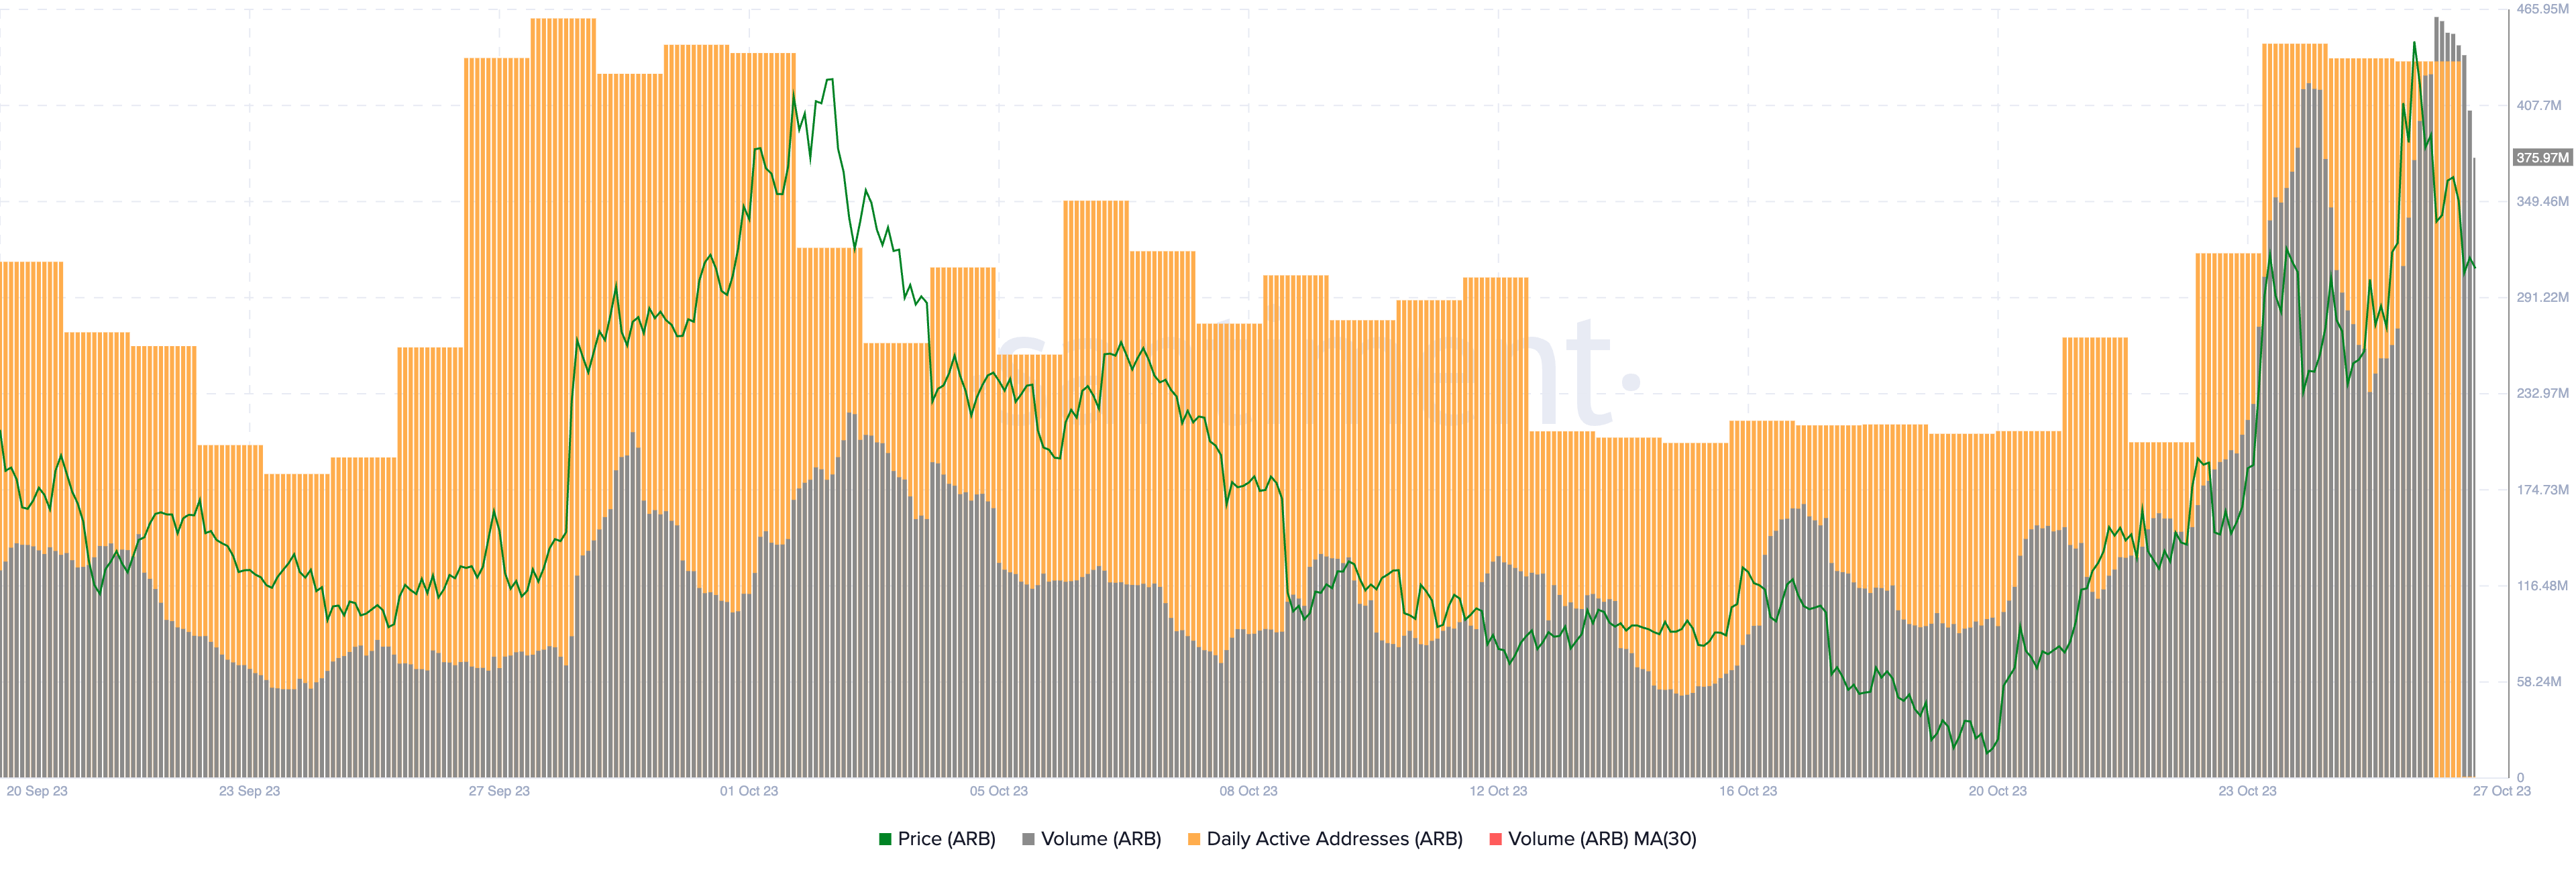 Arbitrum trade volume and daily active addresses as seen on Santiment